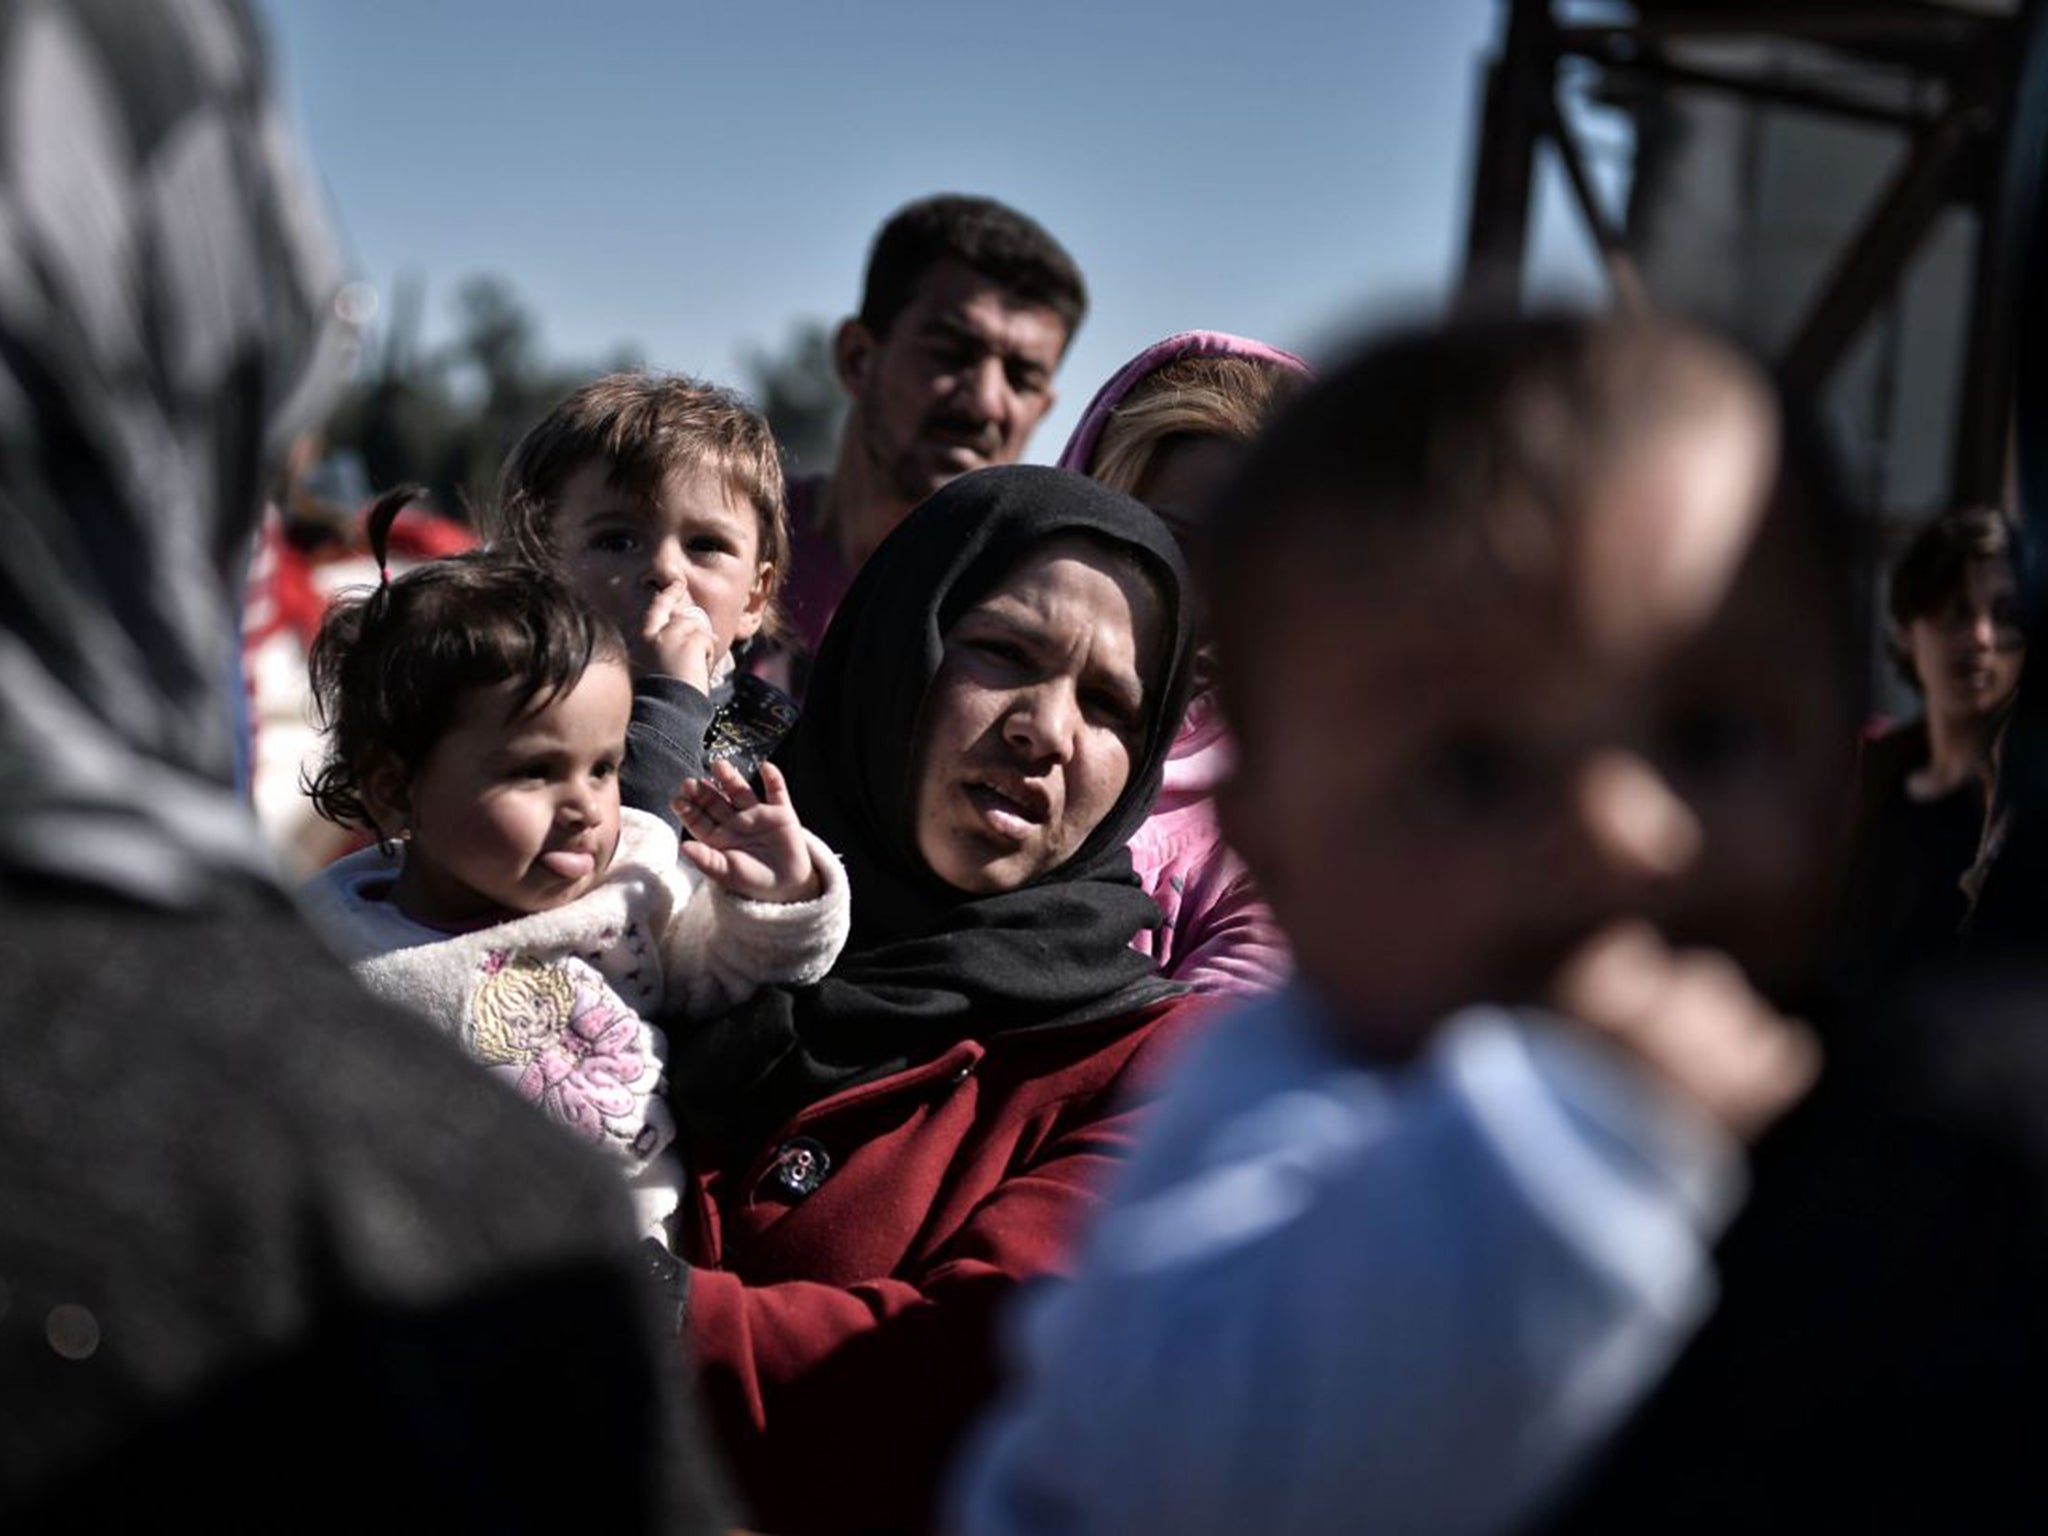 Thousands of refugees eligible for transfer remain in squalid camps in Greece and Italy